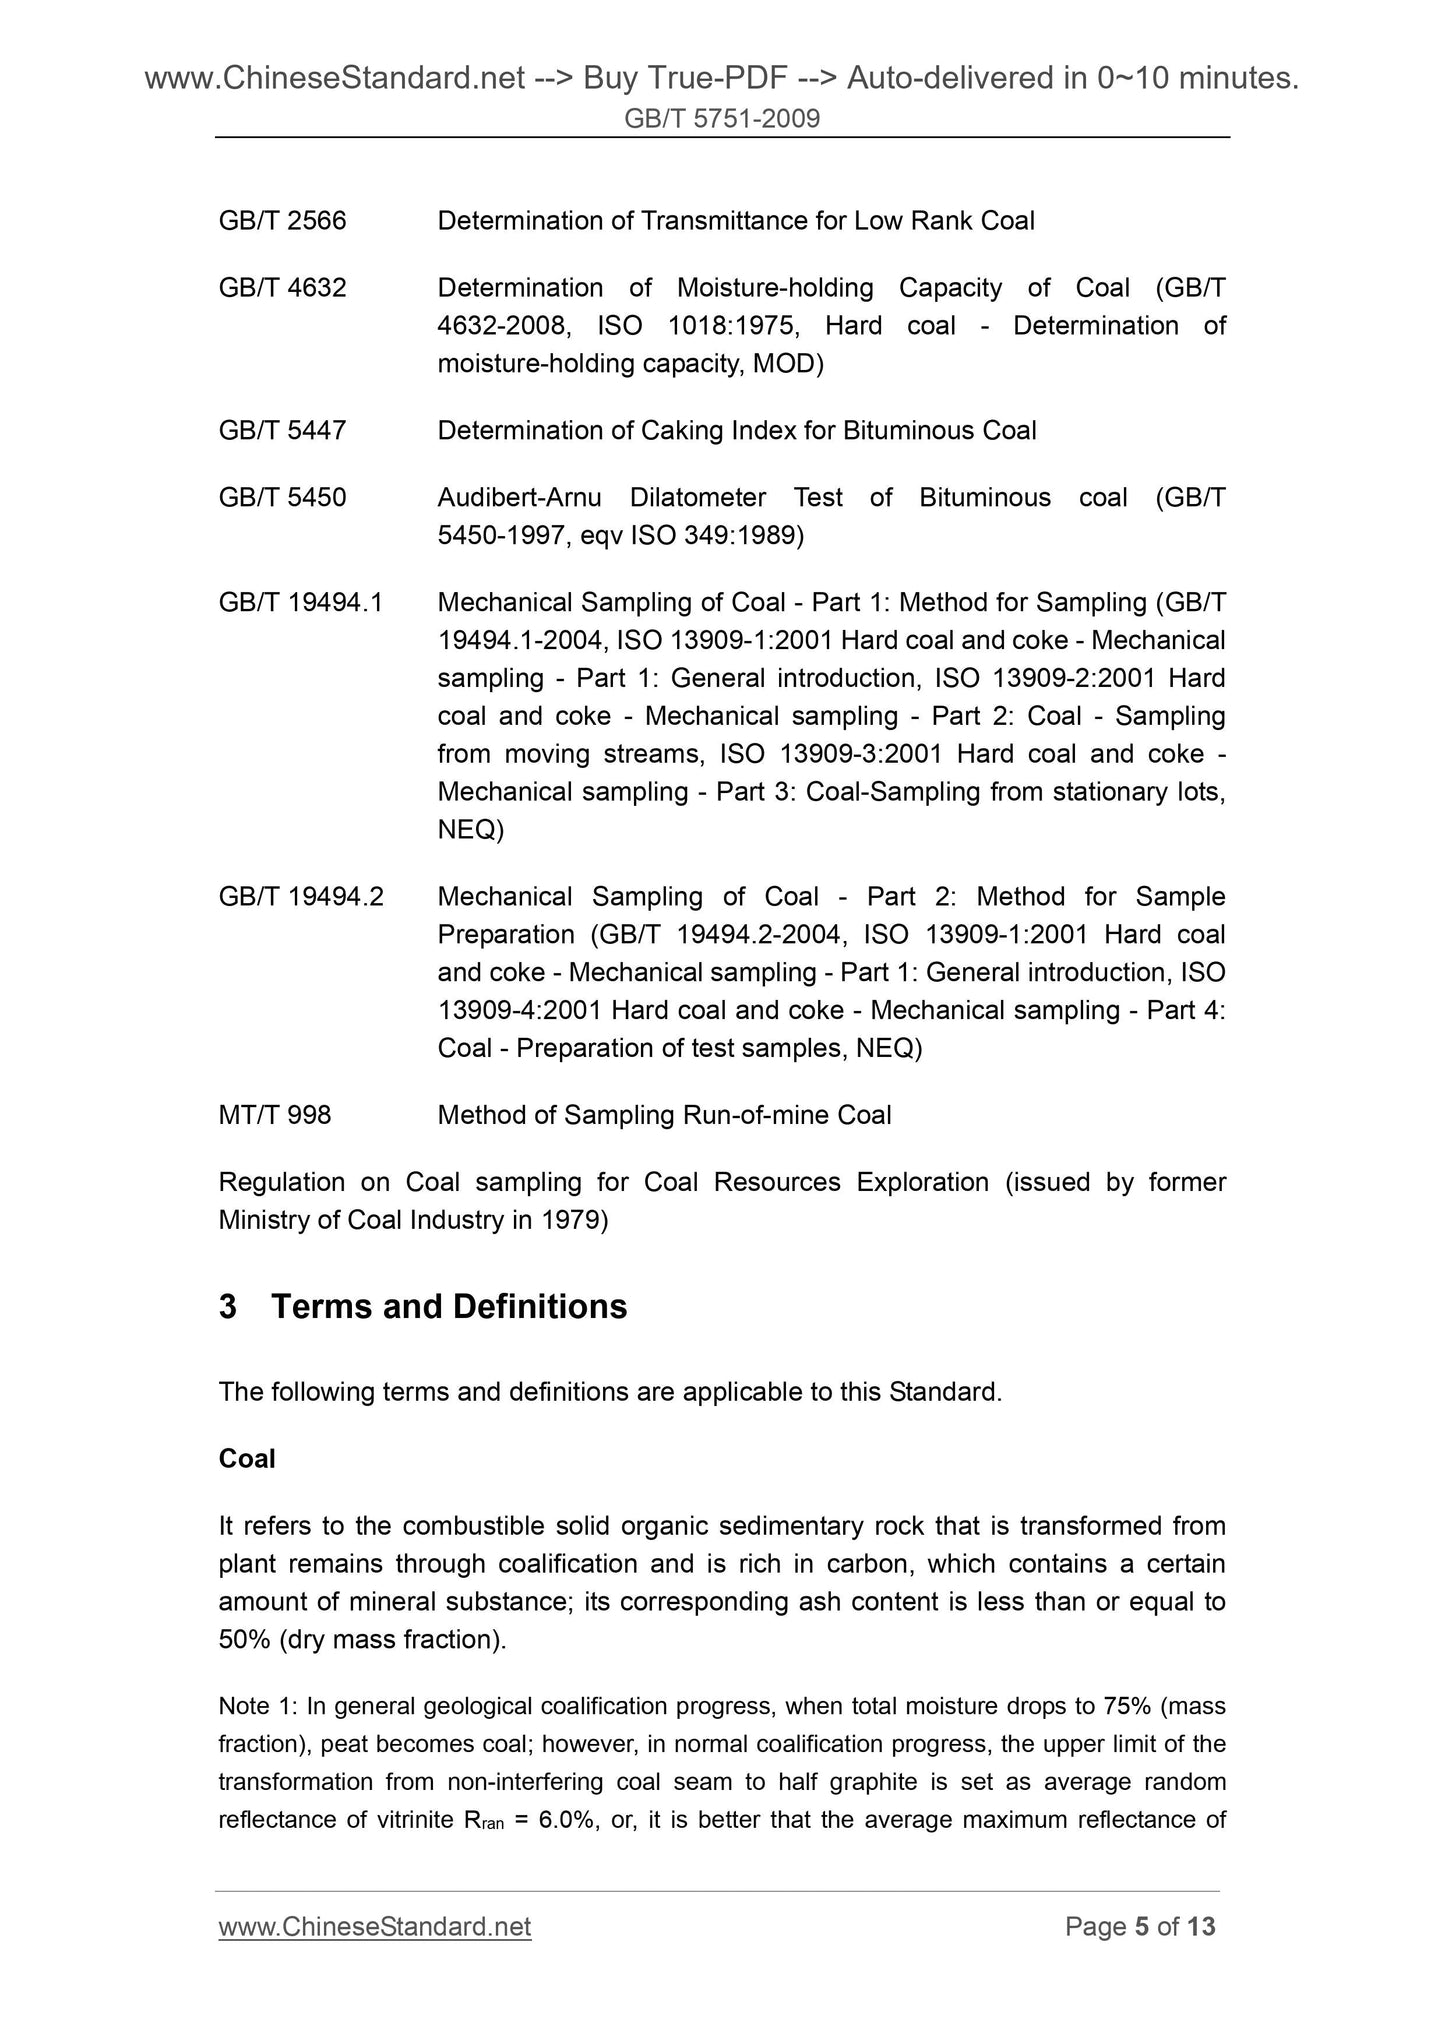 GB/T 5751-2009 Page 5